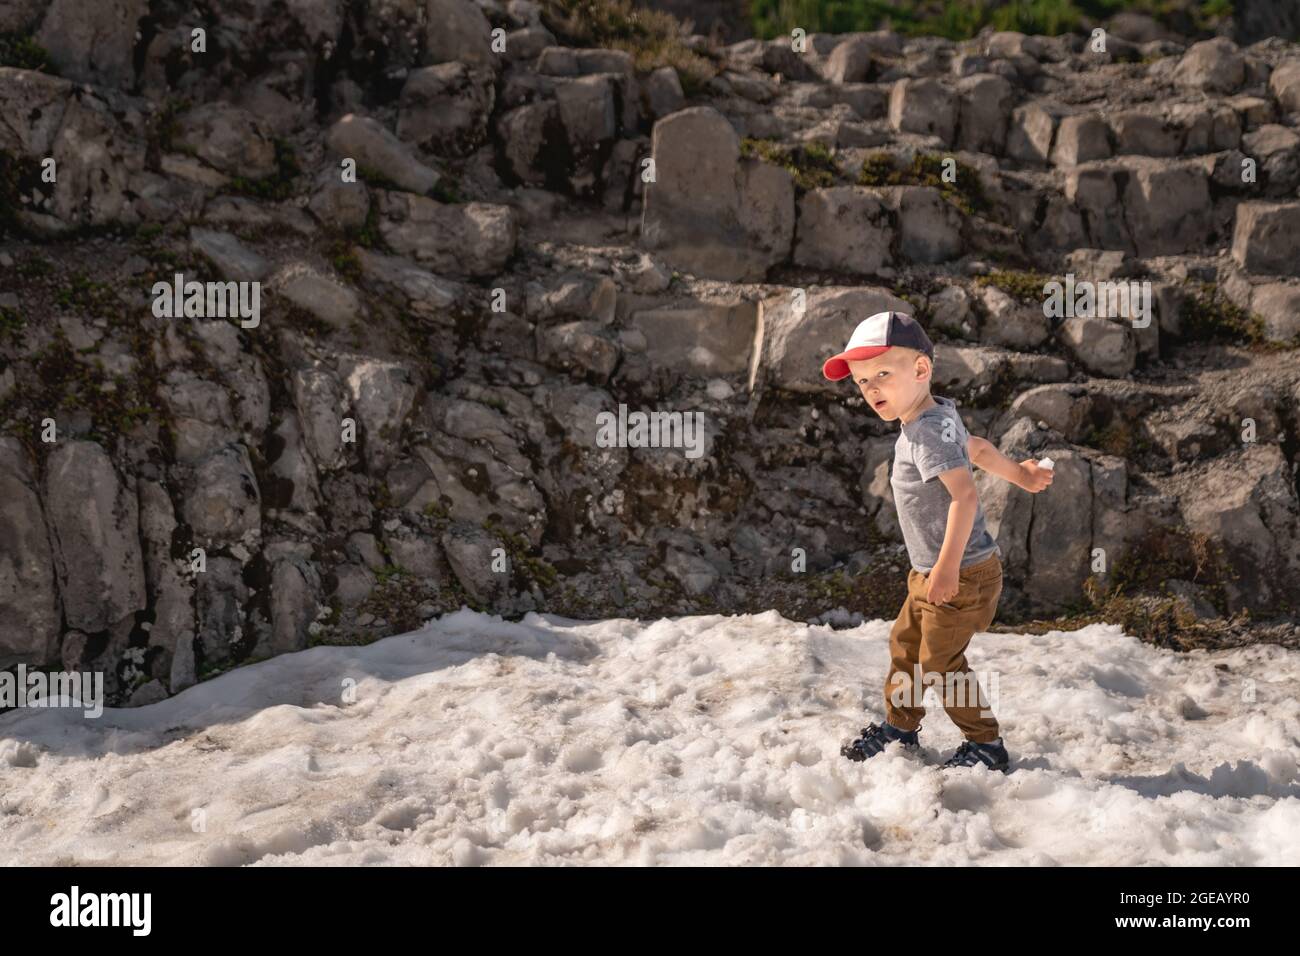 Young boy throwing snowballs in summer at Heather Meadows in the Mt. Baker-Snoqualmie National Forest. Stock Photo